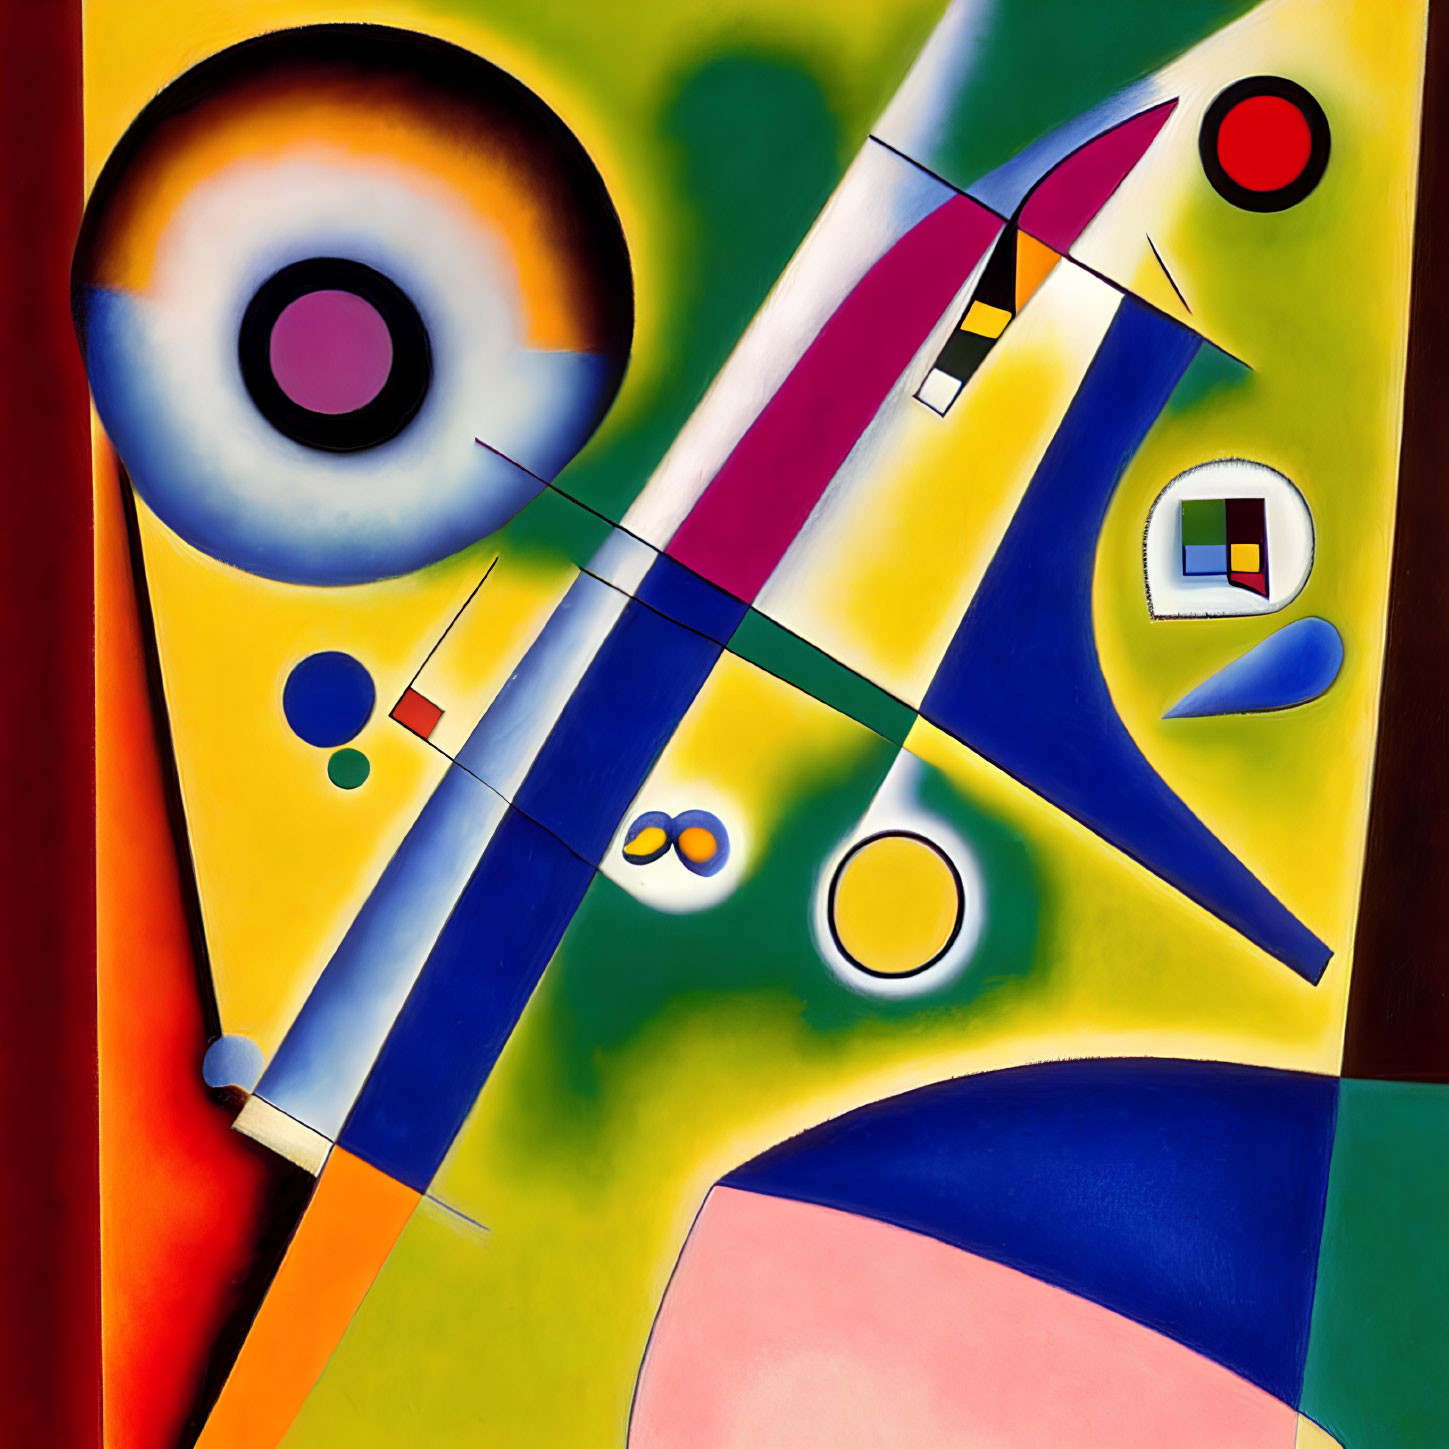 Vibrant Abstract Painting: Geometric Shapes, Central Eye Motif, Intersecting Lines